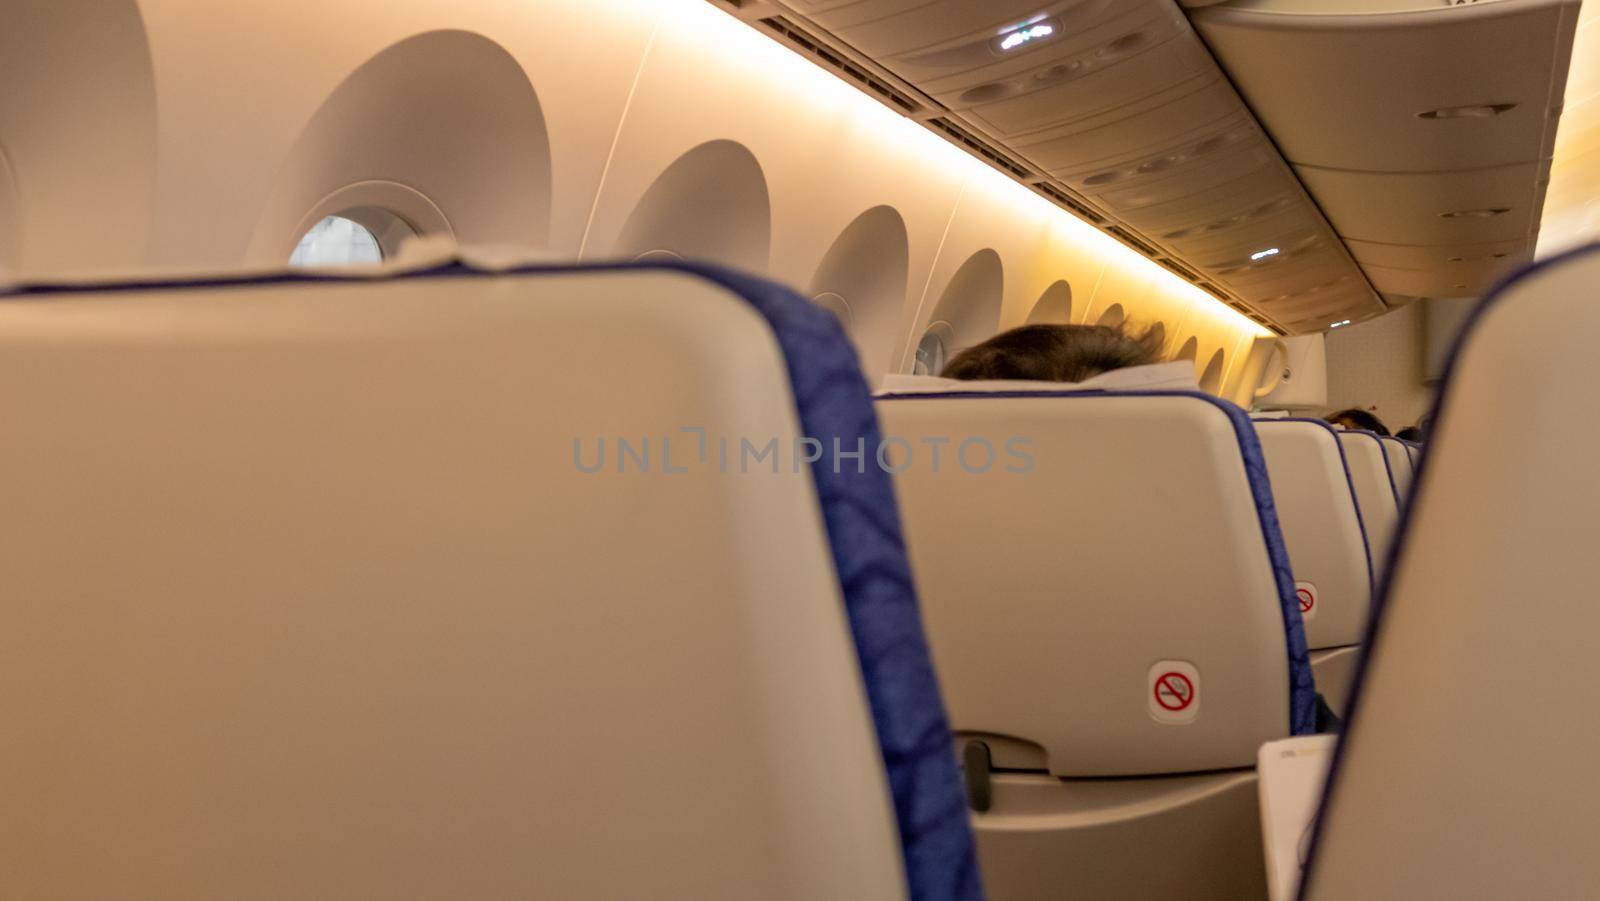 Seating interior of an airplane cabin